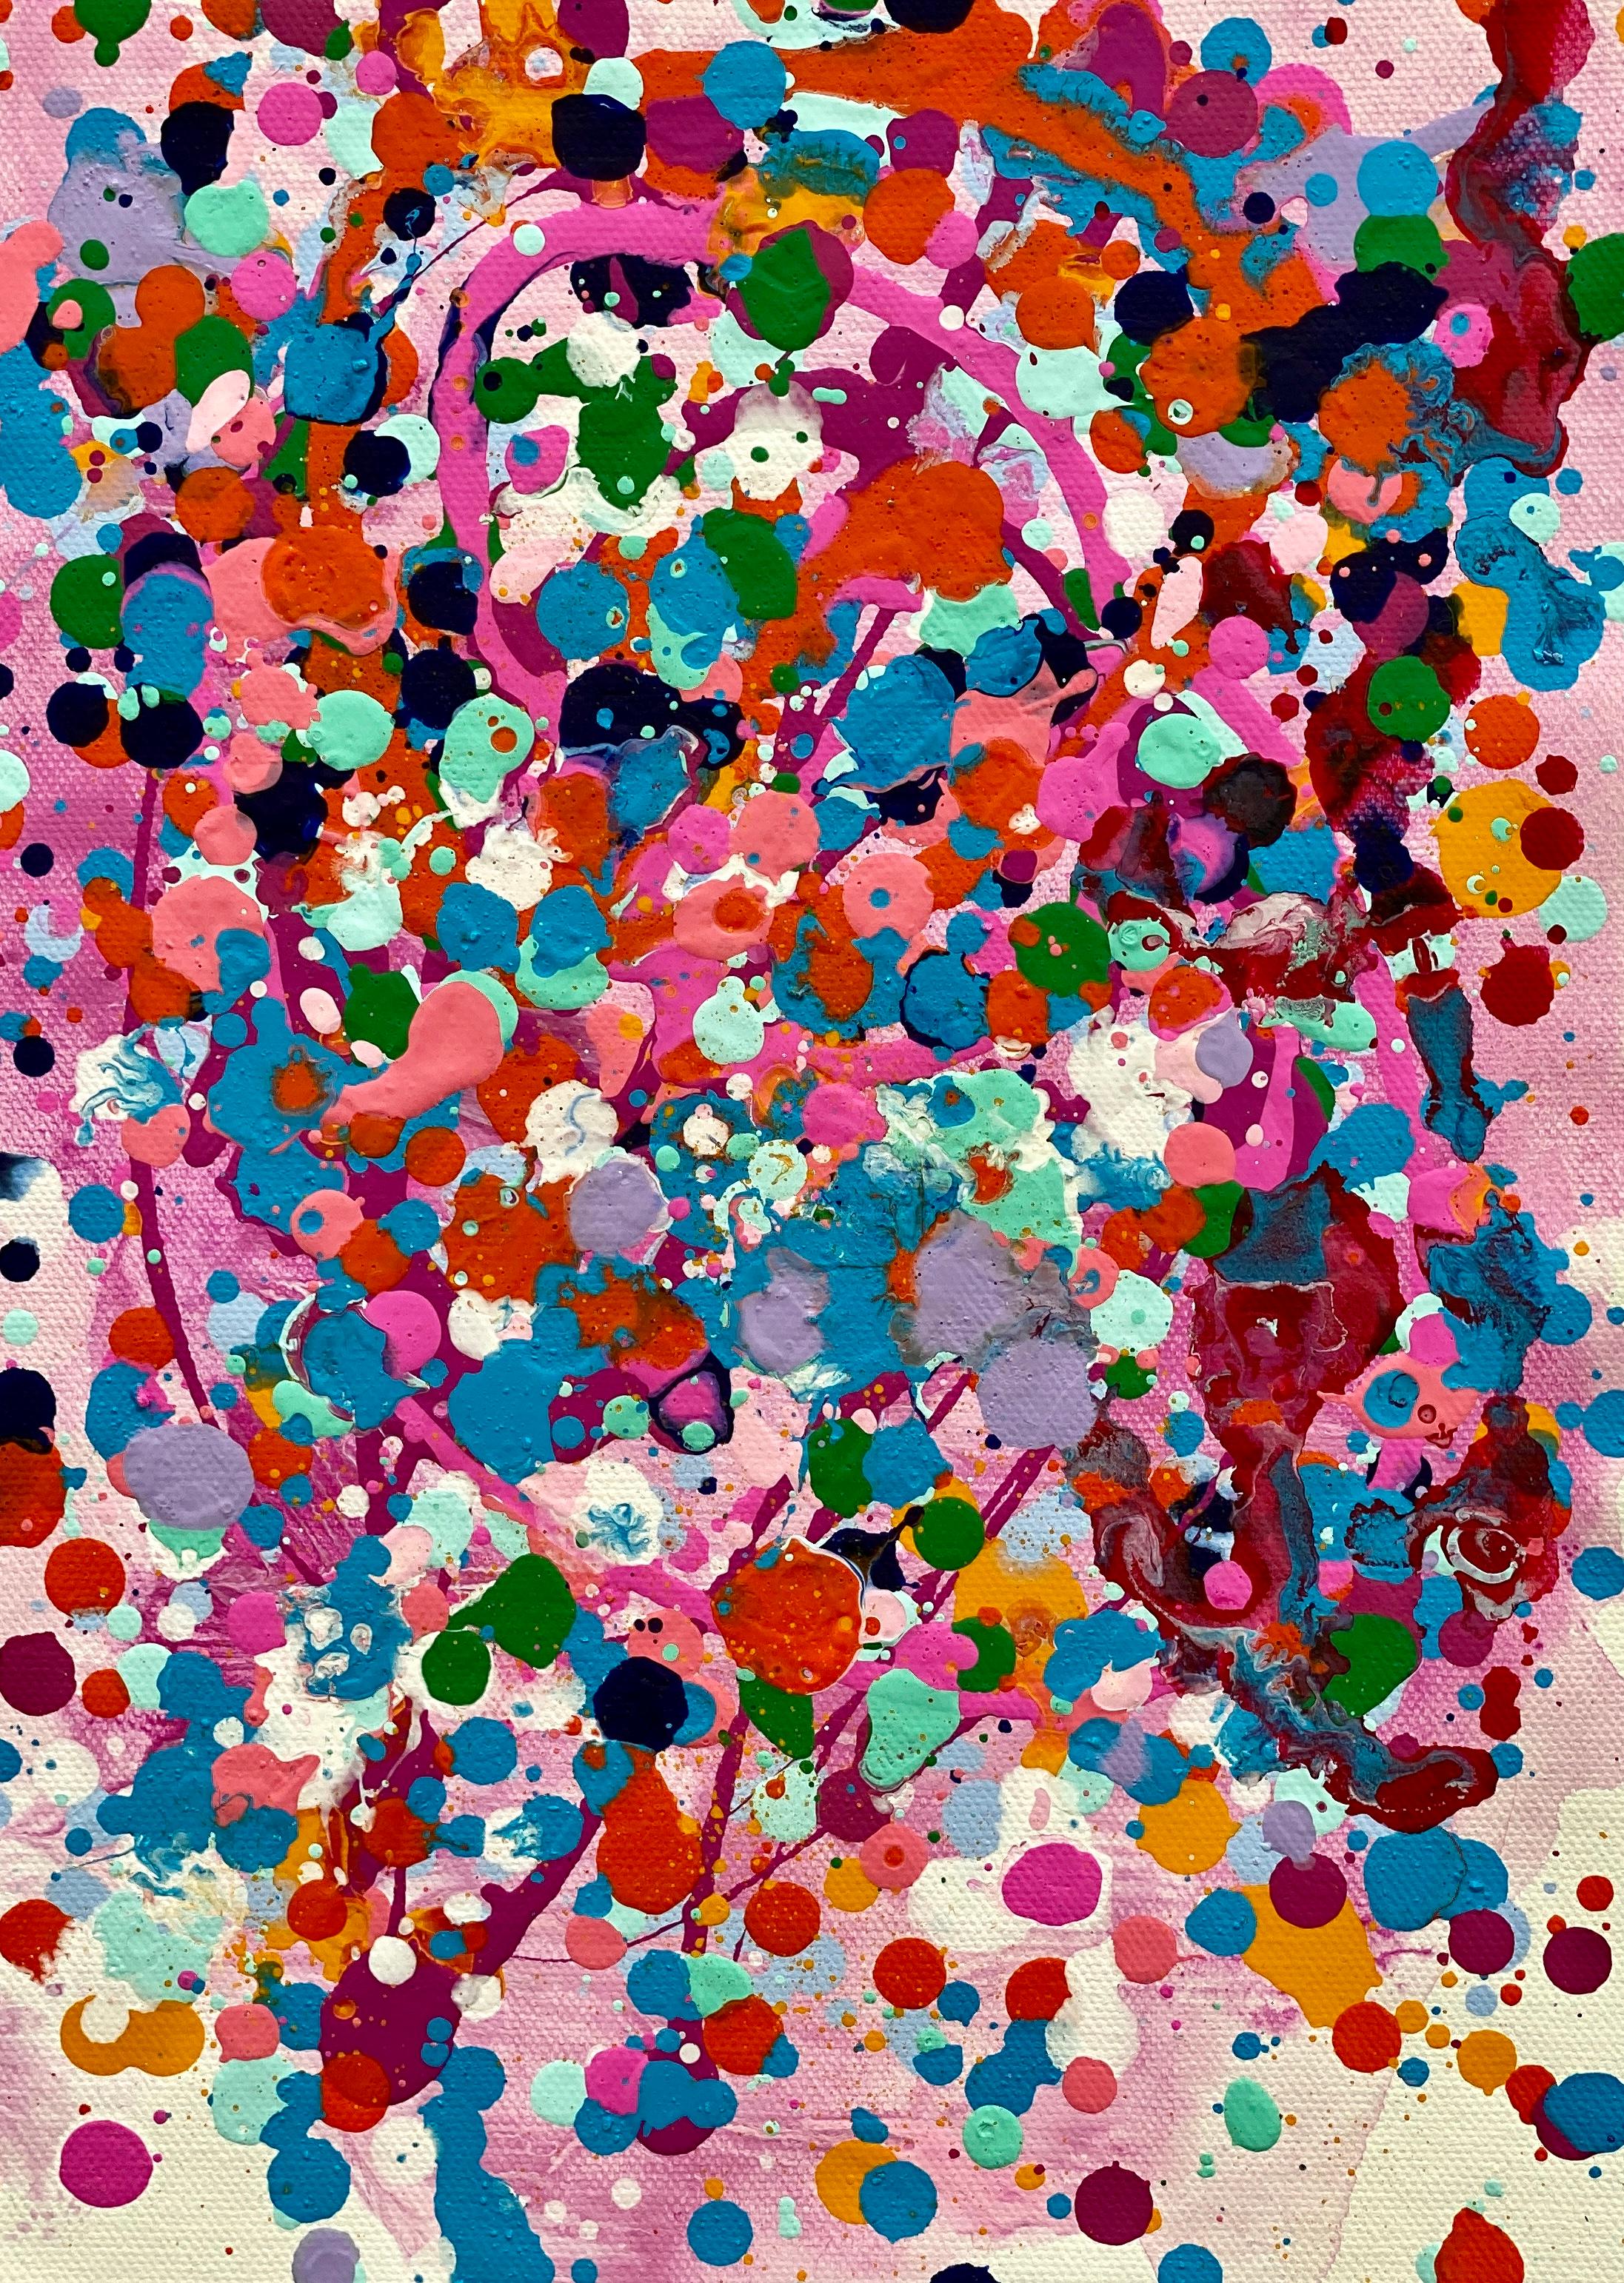 Colorful spatter no4 drip abstract expressionist Jackson Pollock pink orange